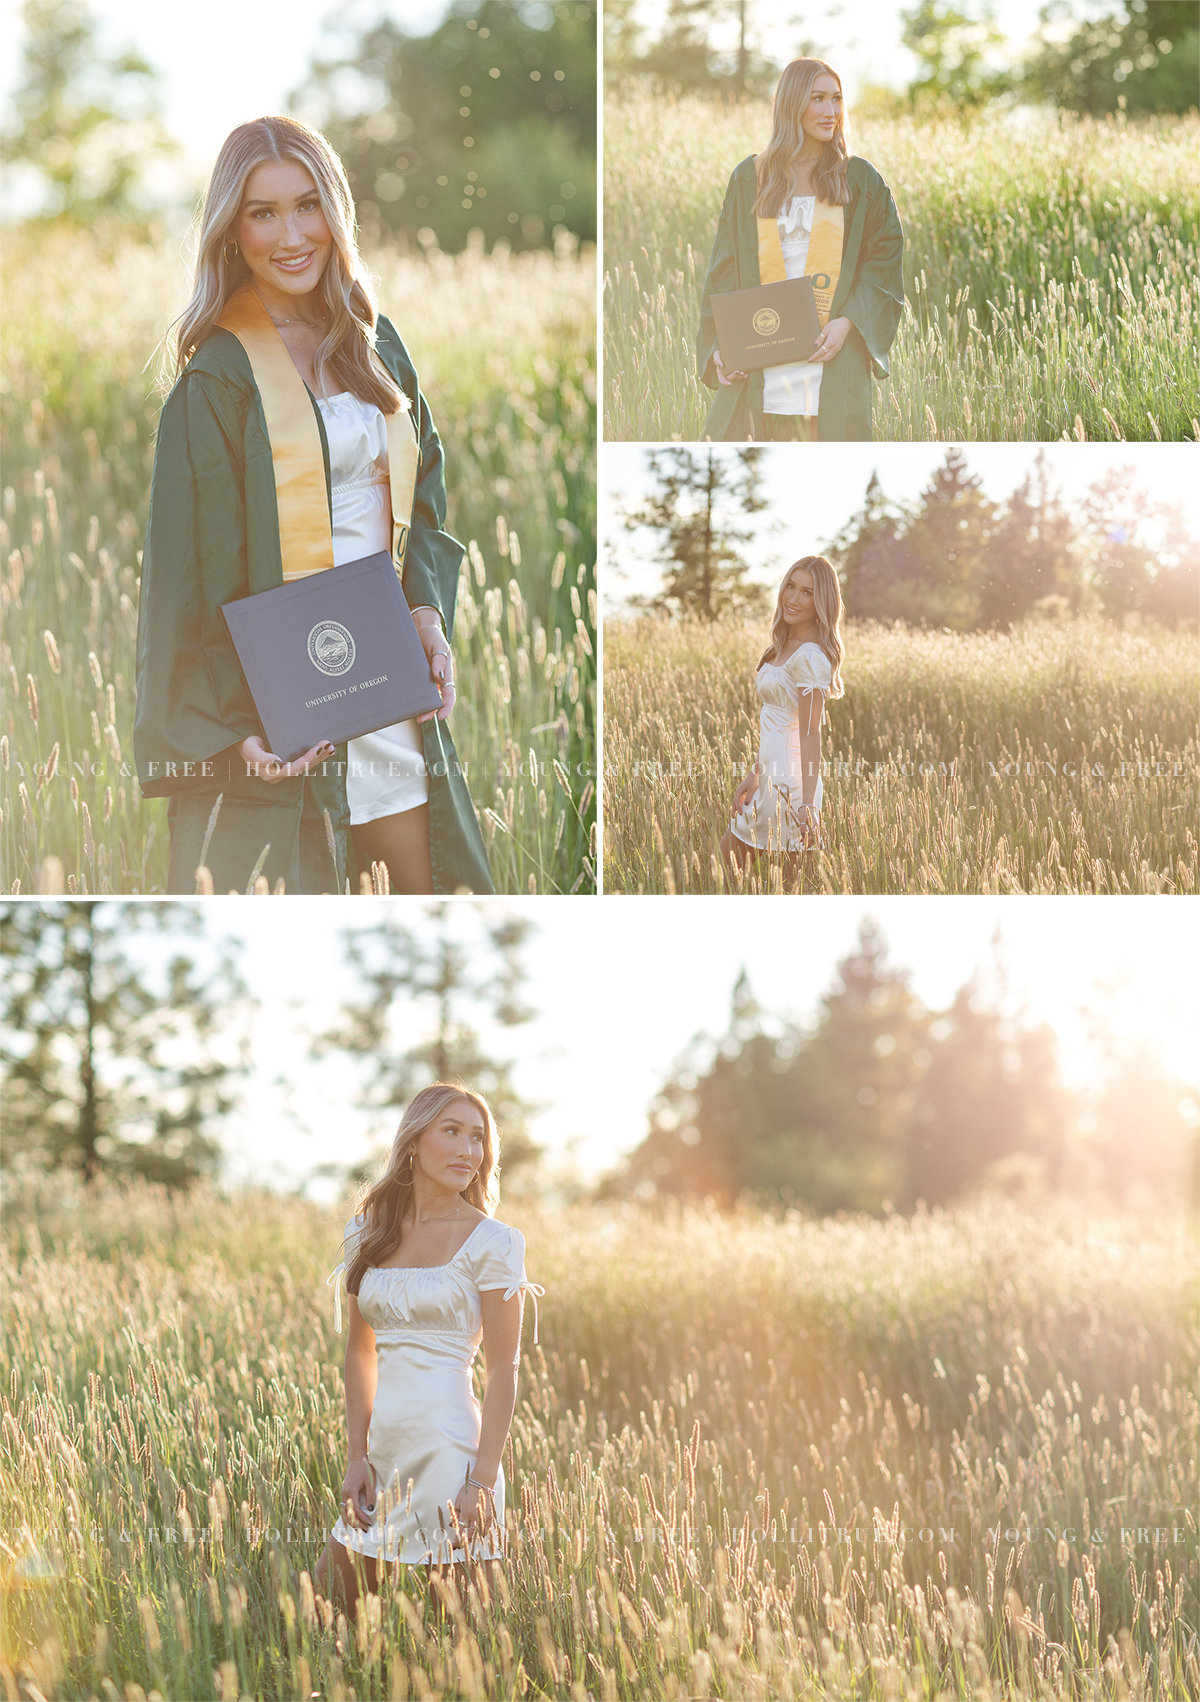 Sunset U of O College Senior Pictures at sunset in a field of tall grass by Holli True